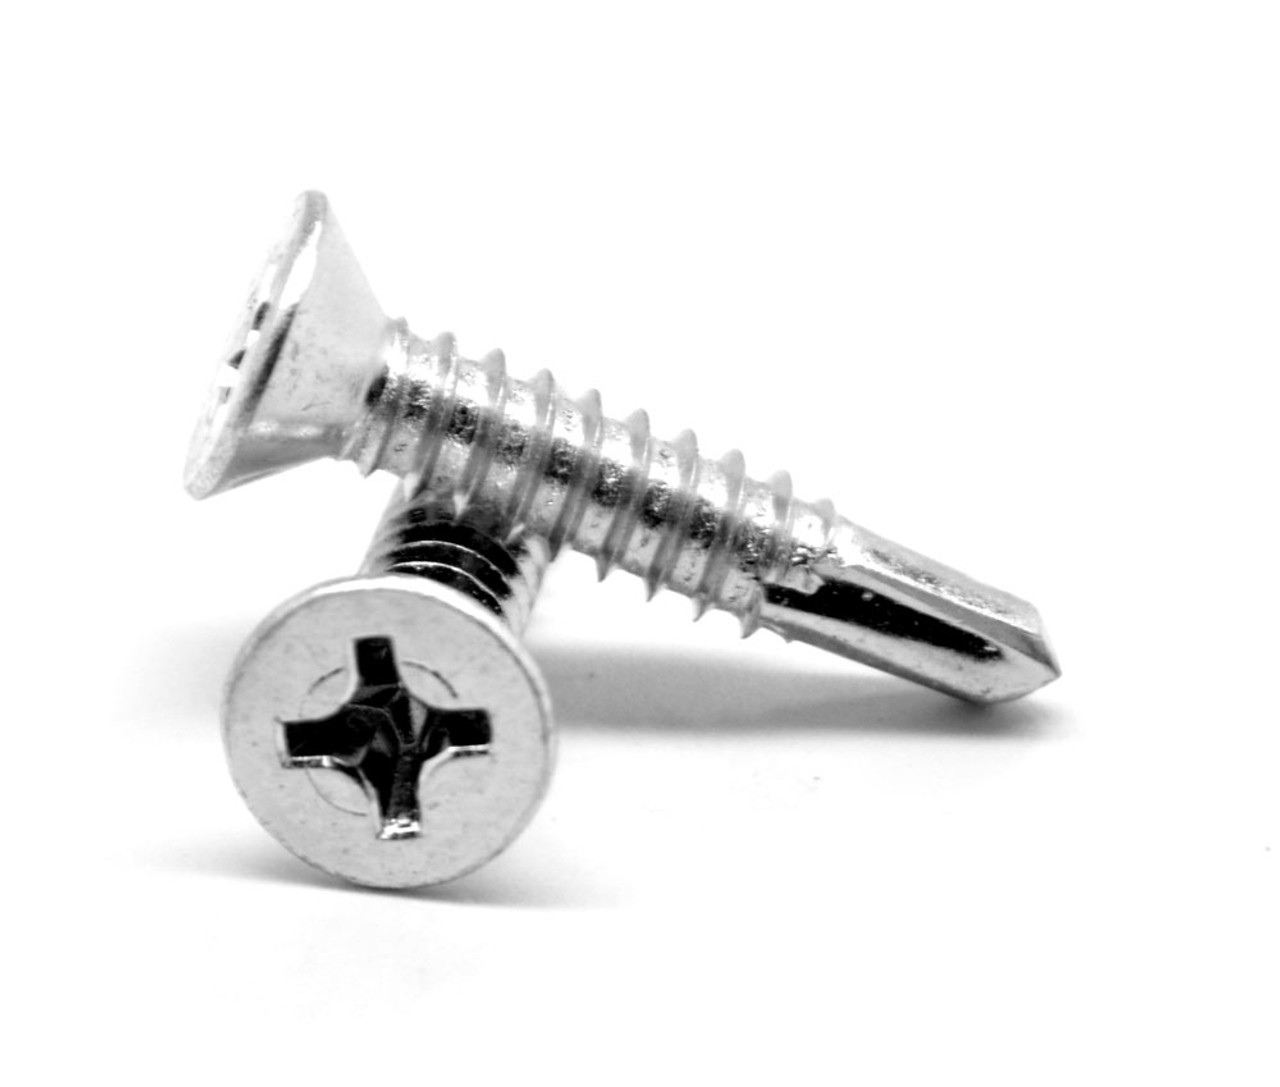 #6-20 x 1" (FT) Self Drilling Screws Phillips Flat Head #2 Point Stainless Steel 410